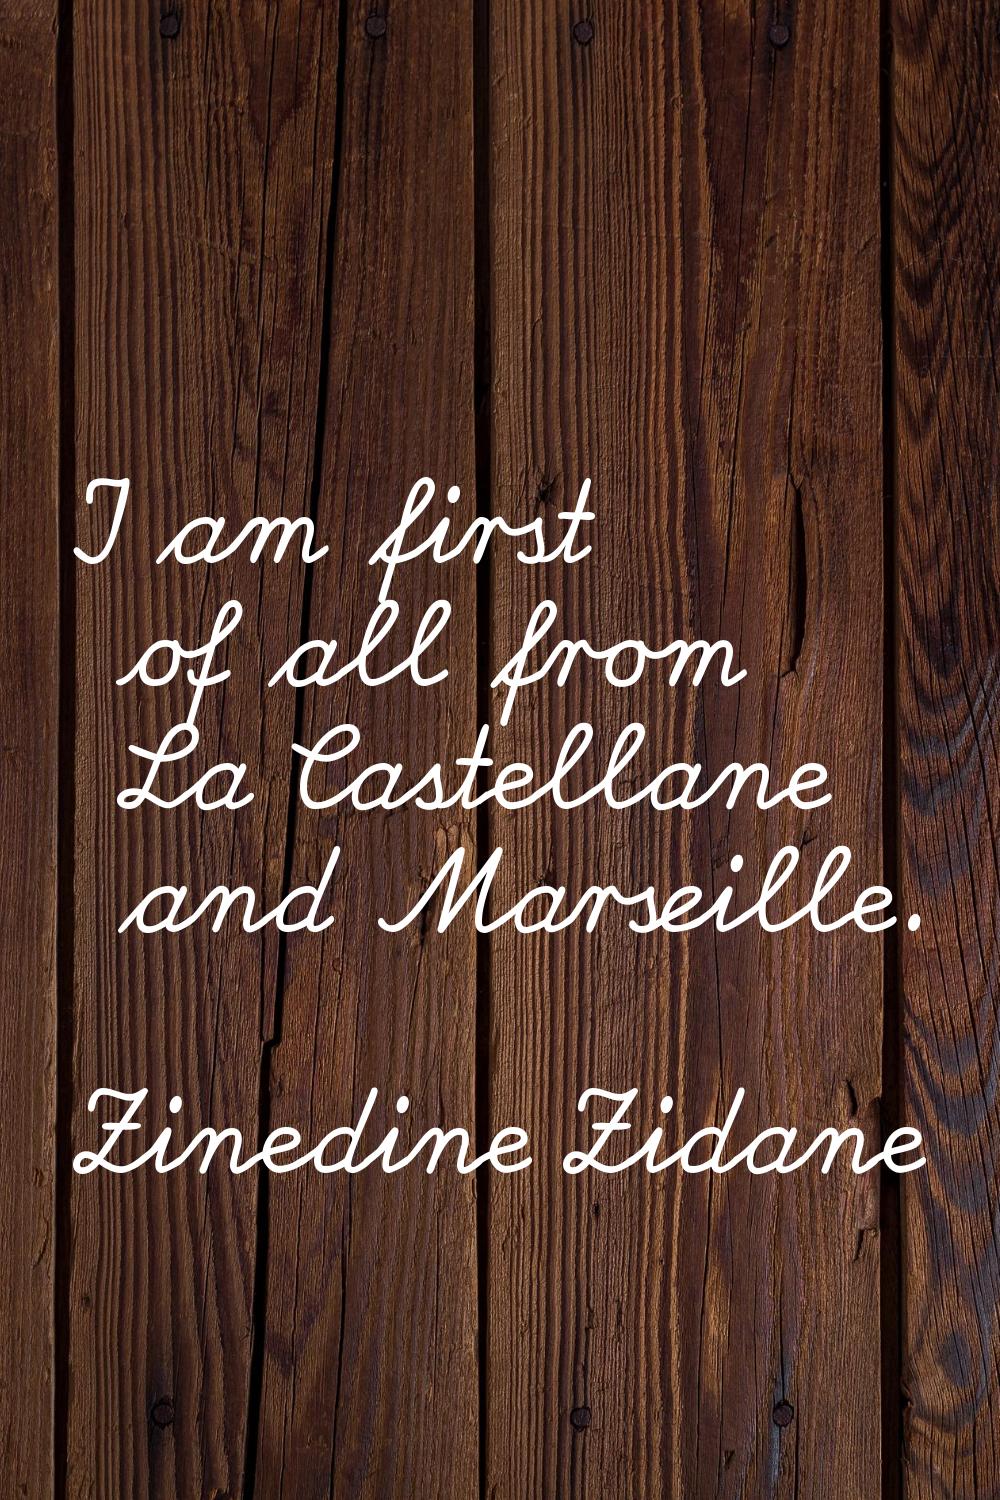 I am first of all from La Castellane and Marseille.